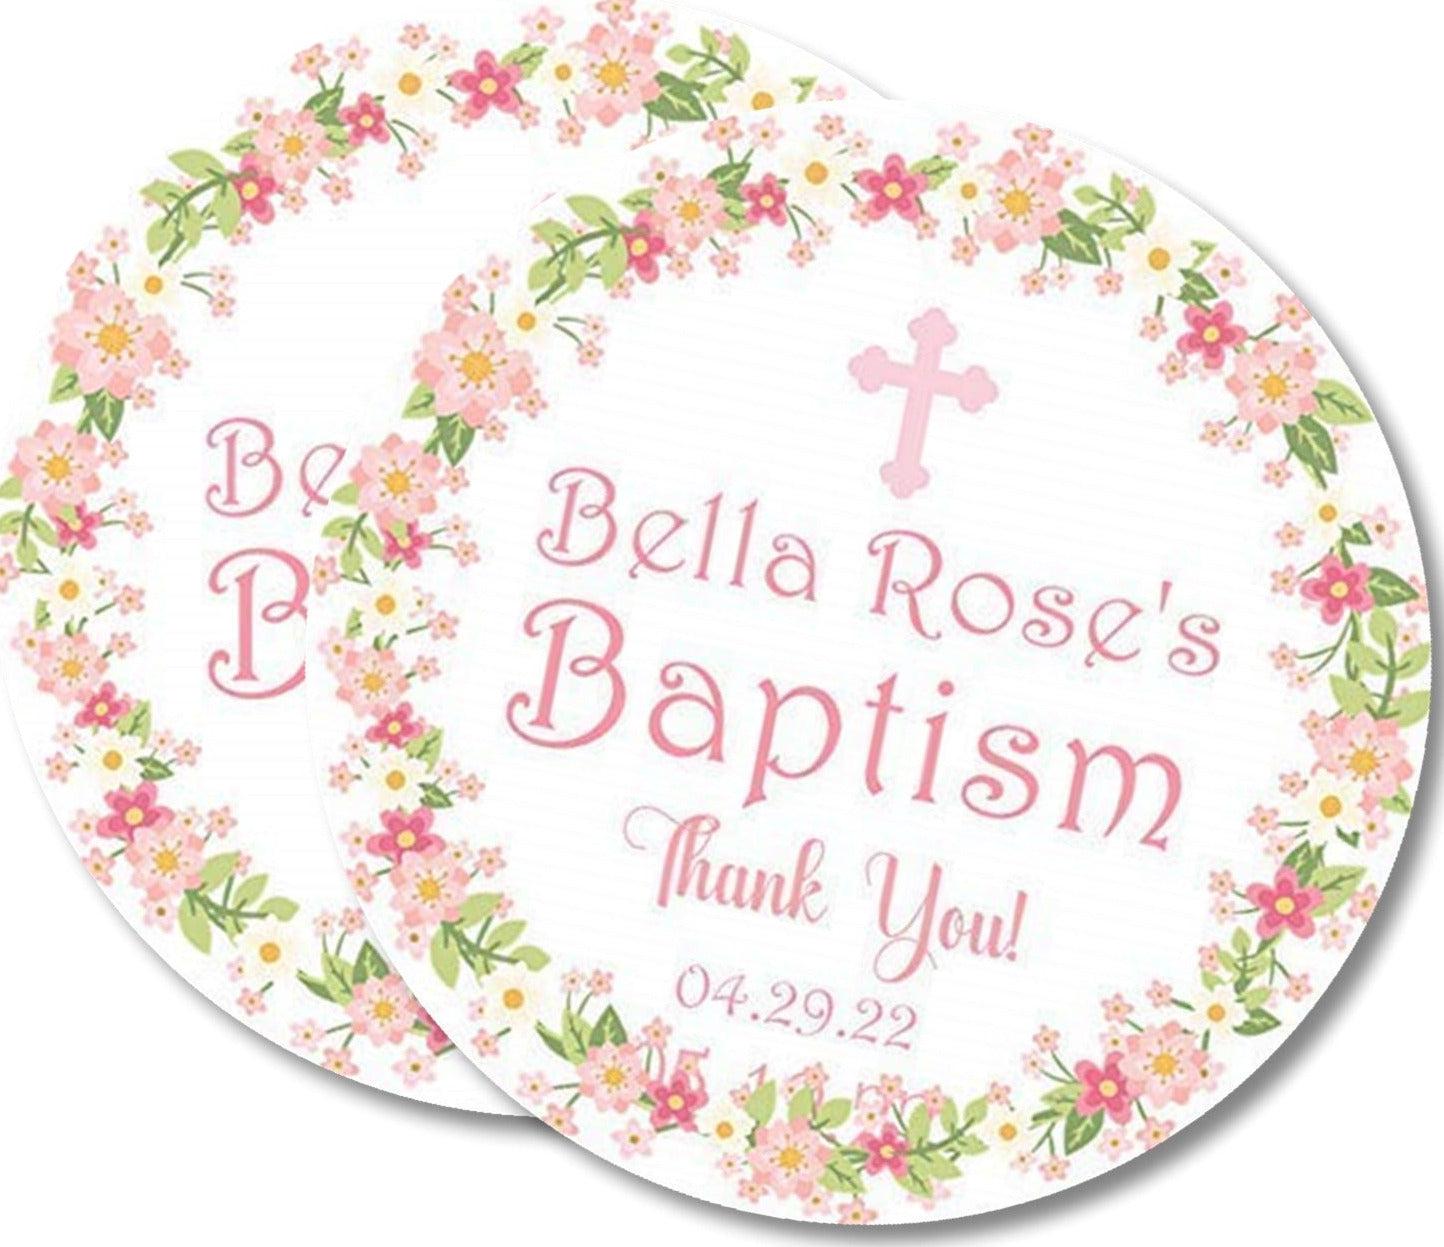 Pink And Green Floral Baptism Stickers Or Favor Tags